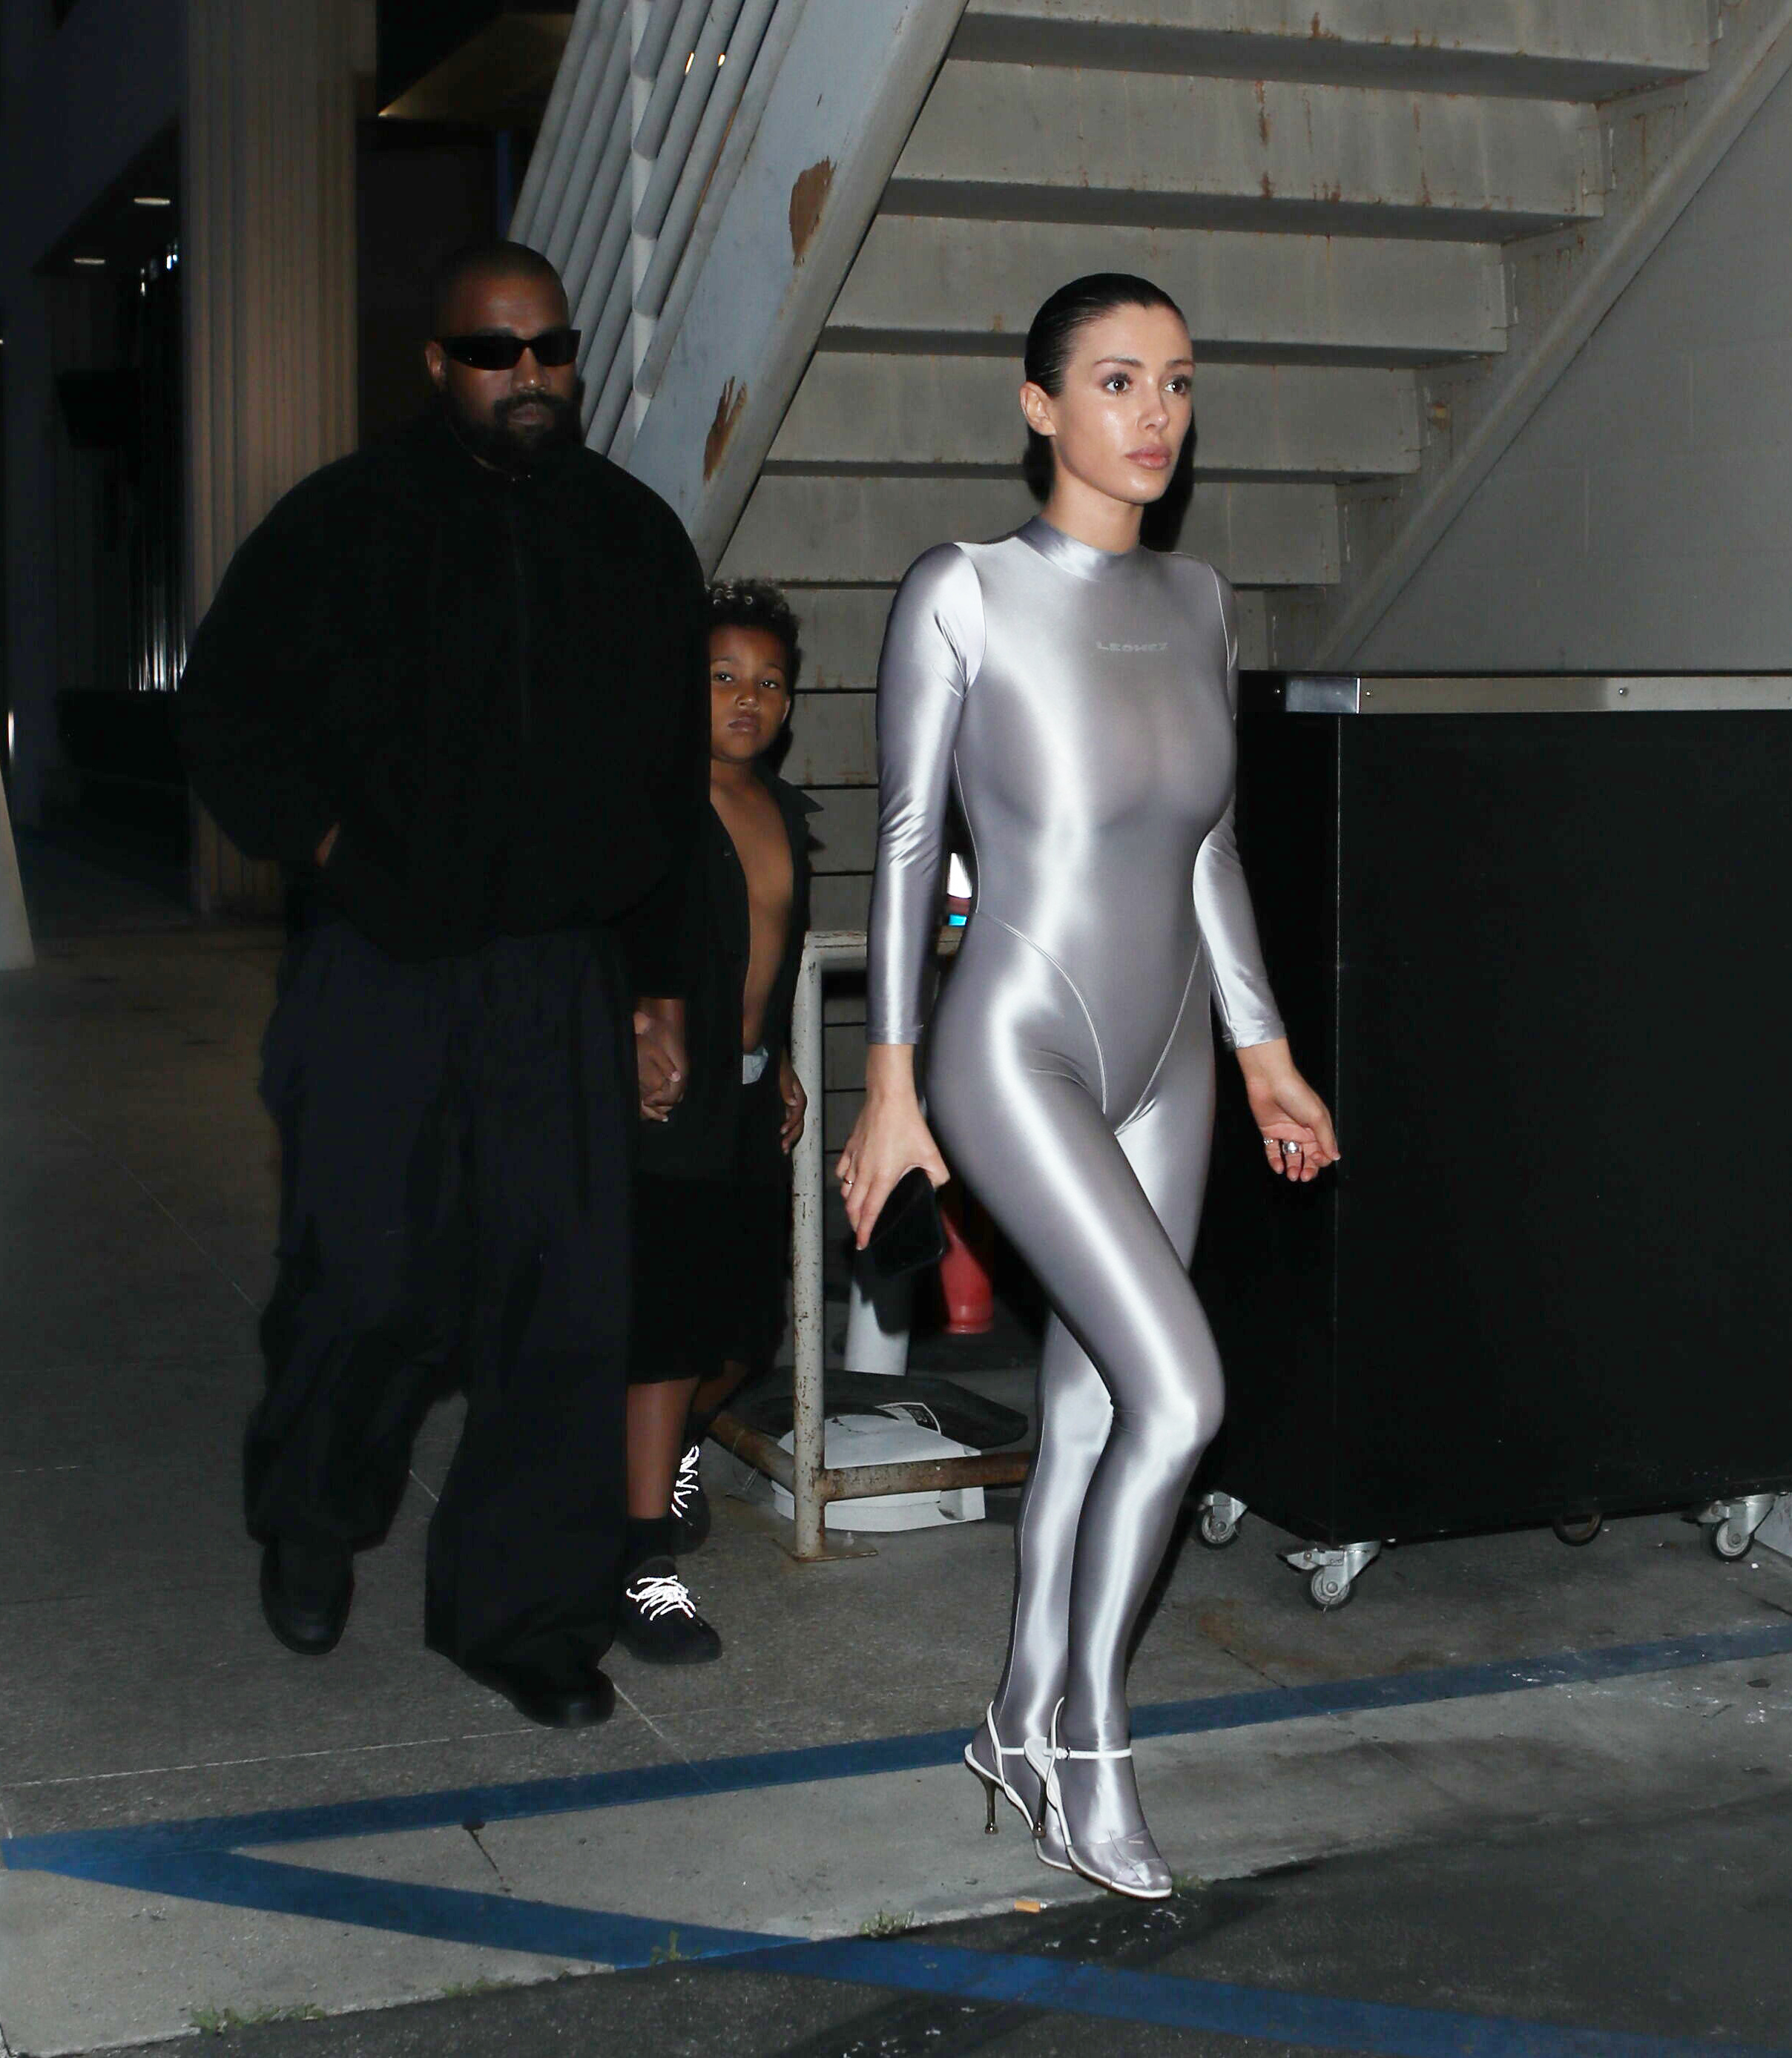 She paired the suit with silver high heels and her hair styled in a sleek bun